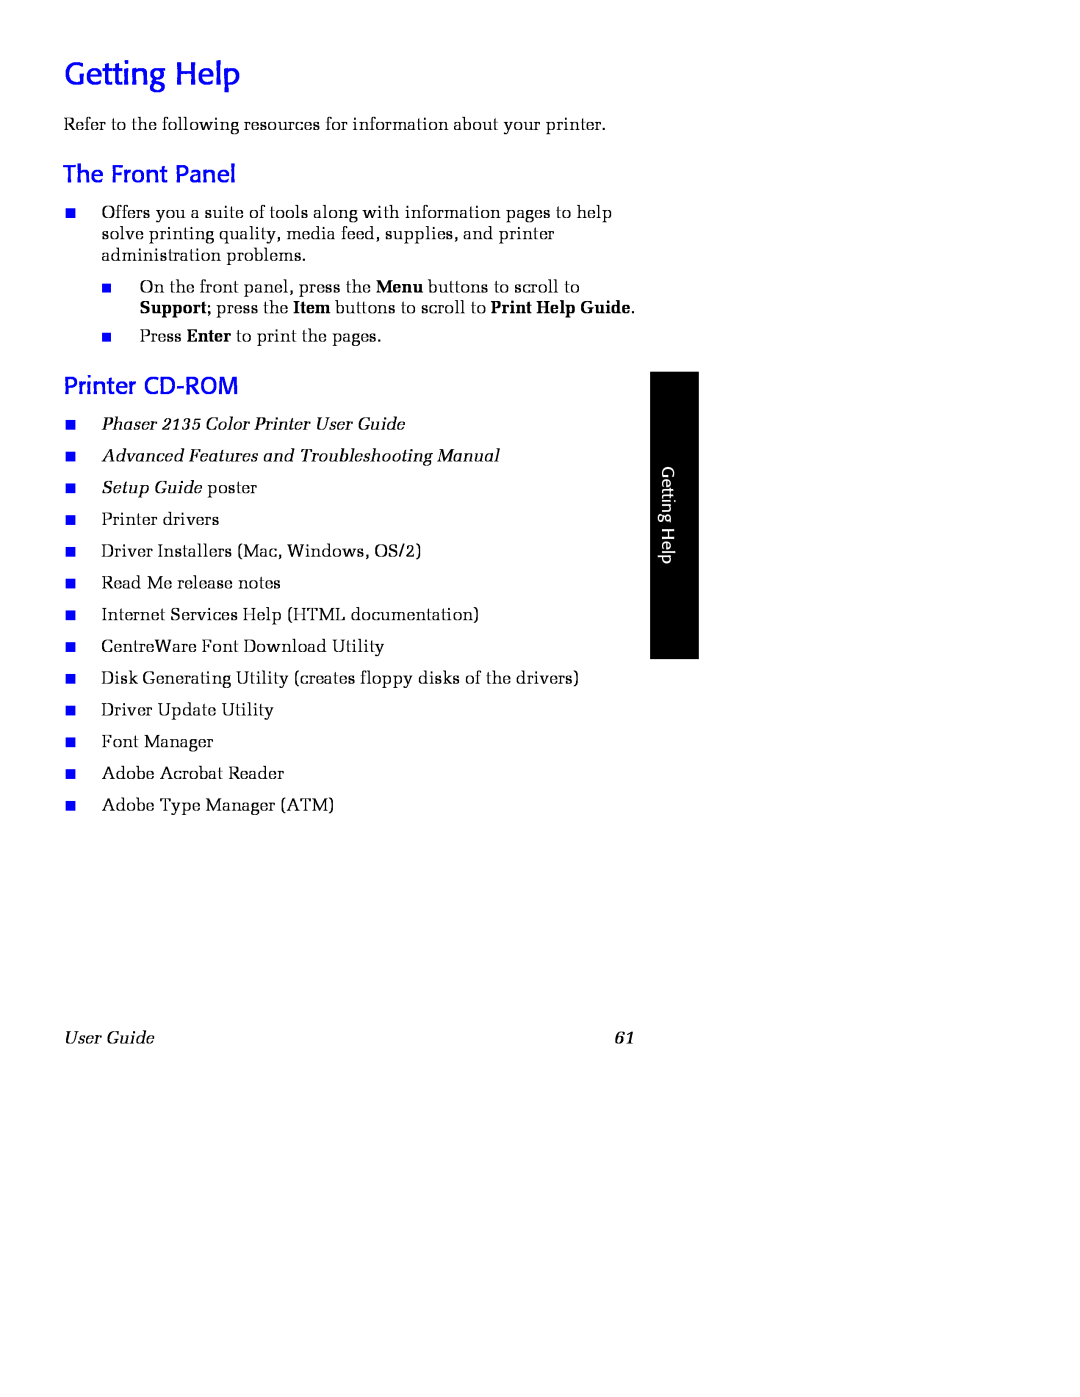 Xerox manual Getting Help, The Front Panel, Printer CD-ROM, Phaser 2135 Color Printer User Guide 